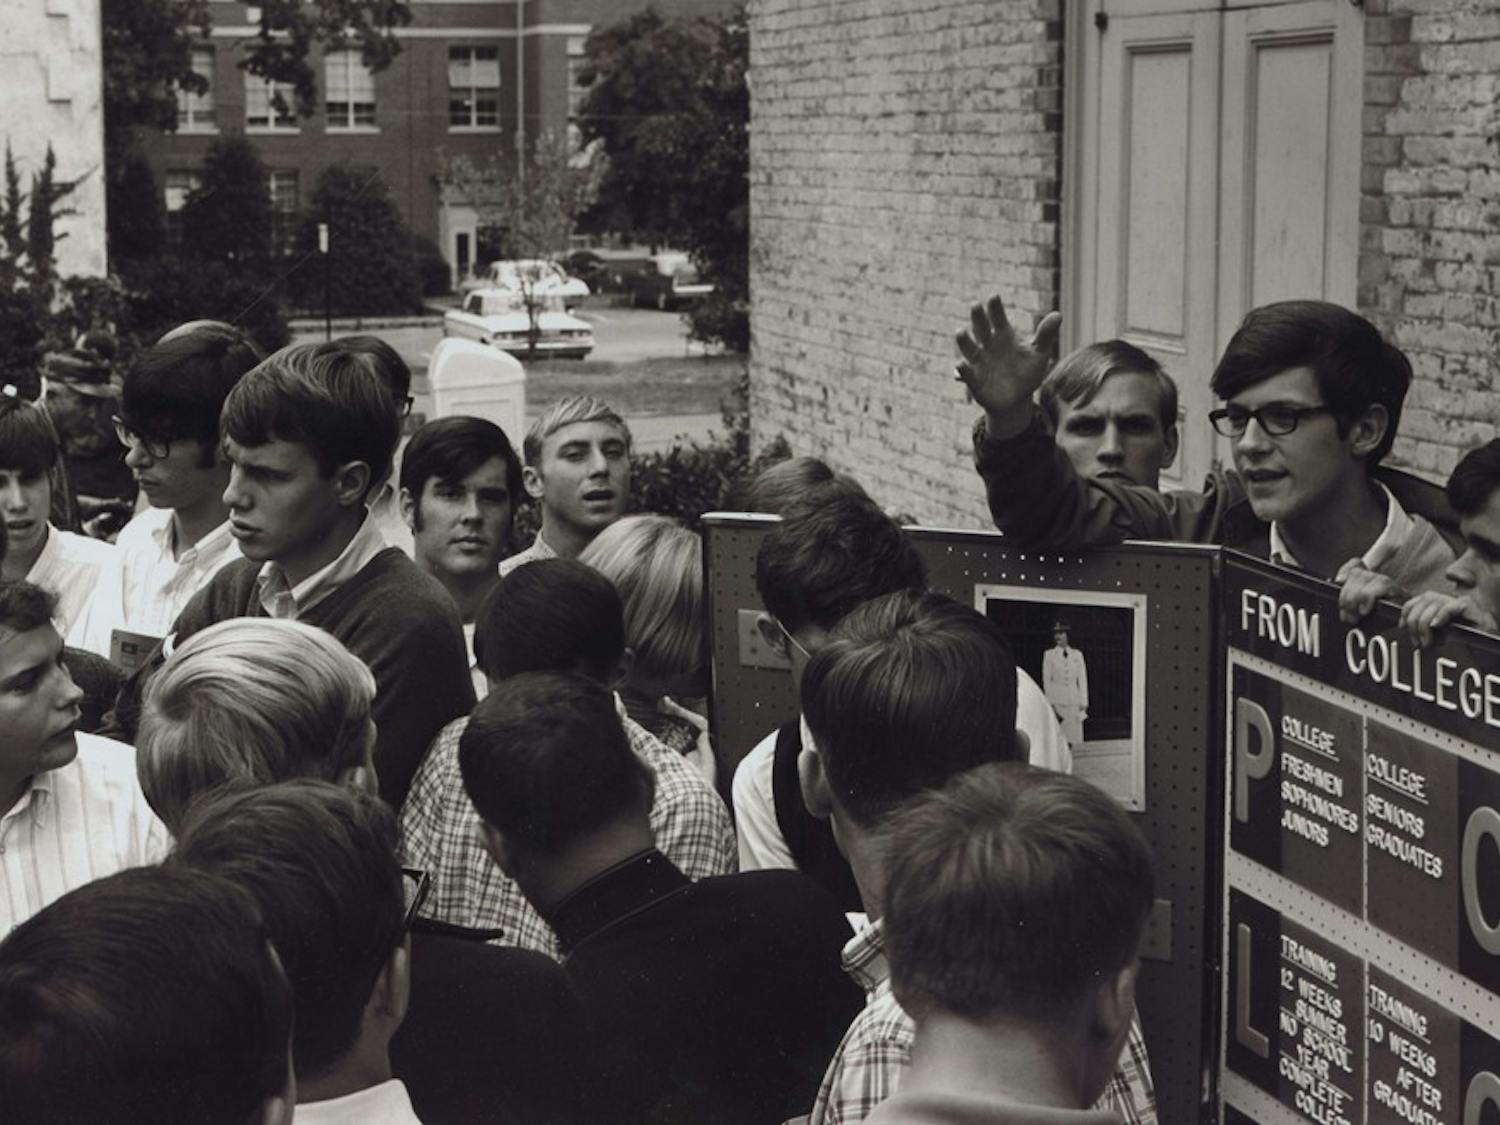 The Kent State March, Campus Y protesters and Anne Queen (left to right) have contributed to the last 150 years of the Campus Y, a student organization focused on social justice. The Campus Y, which has been at UNC since 1860, started dealing with social justice issues during the 1950s, when racial integration started.
